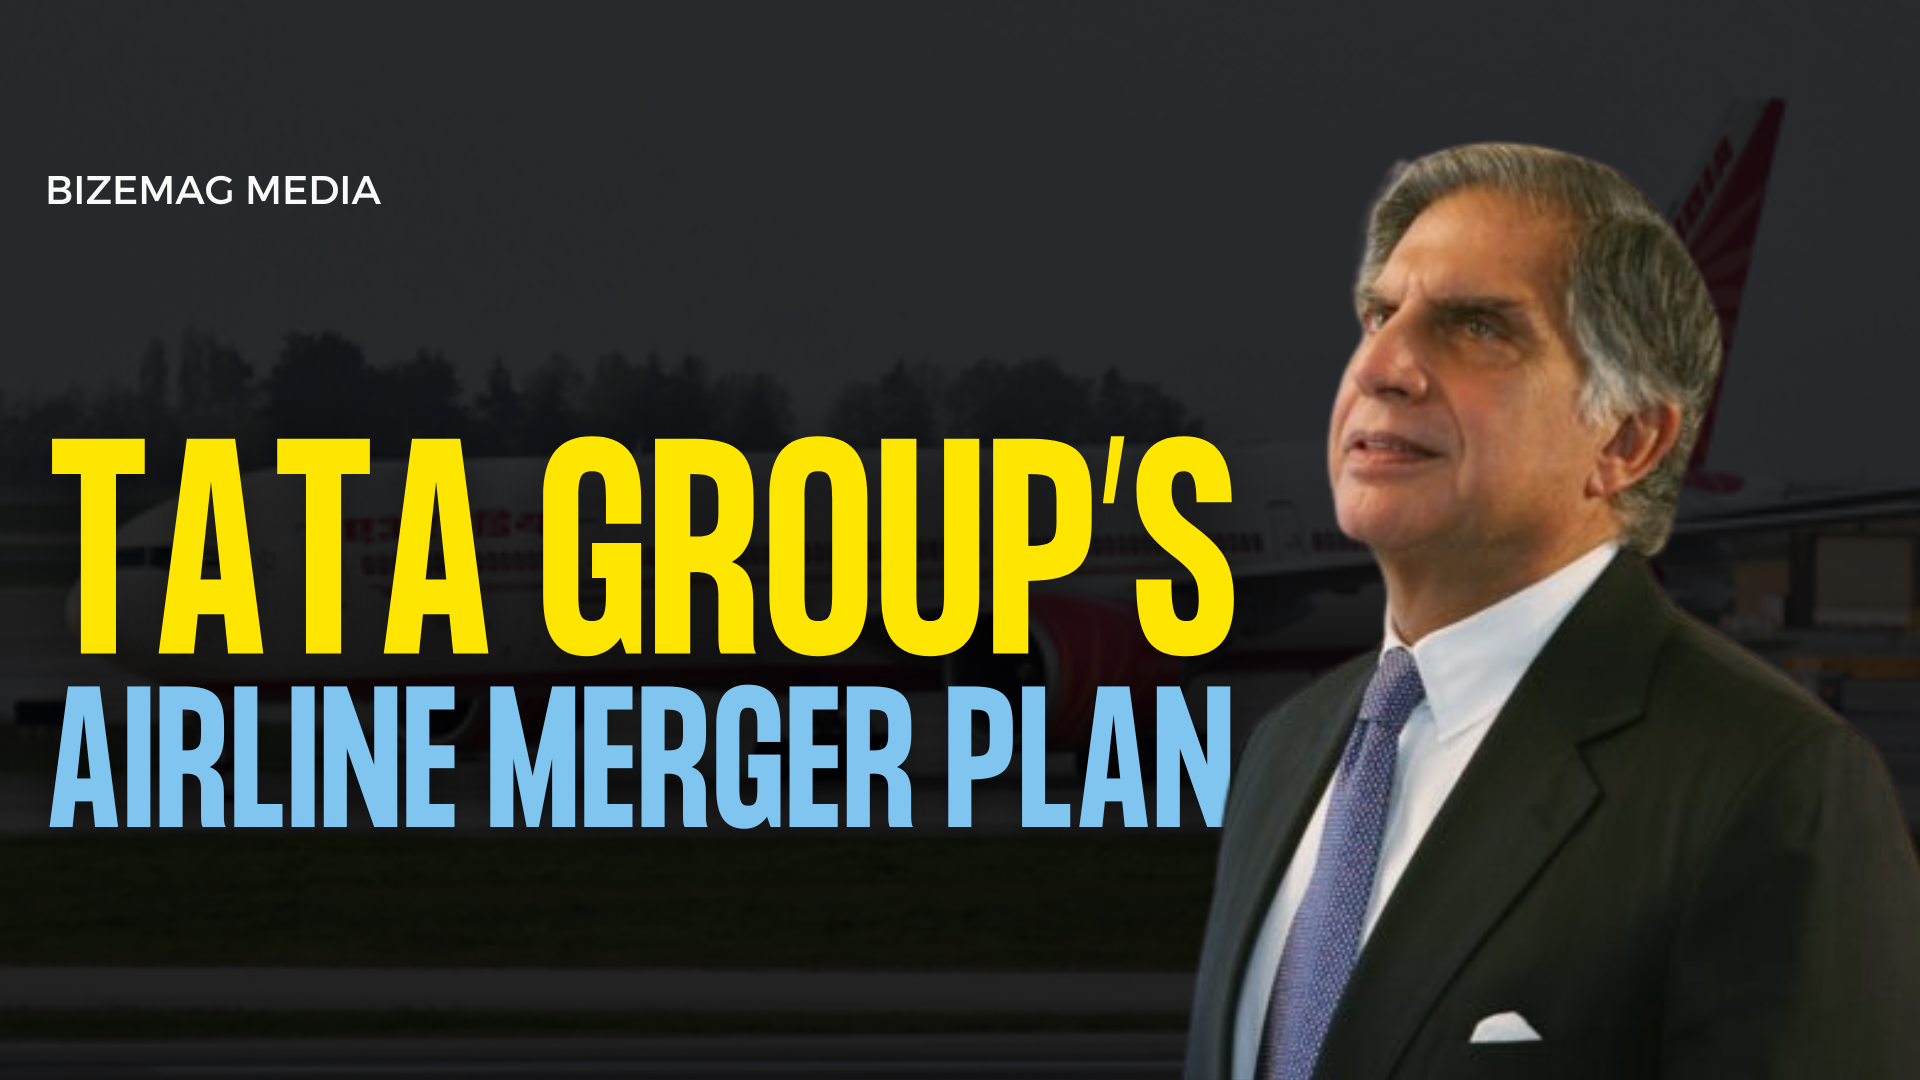 Headline: Here's how the Tata Group’s airline merger plan will happen